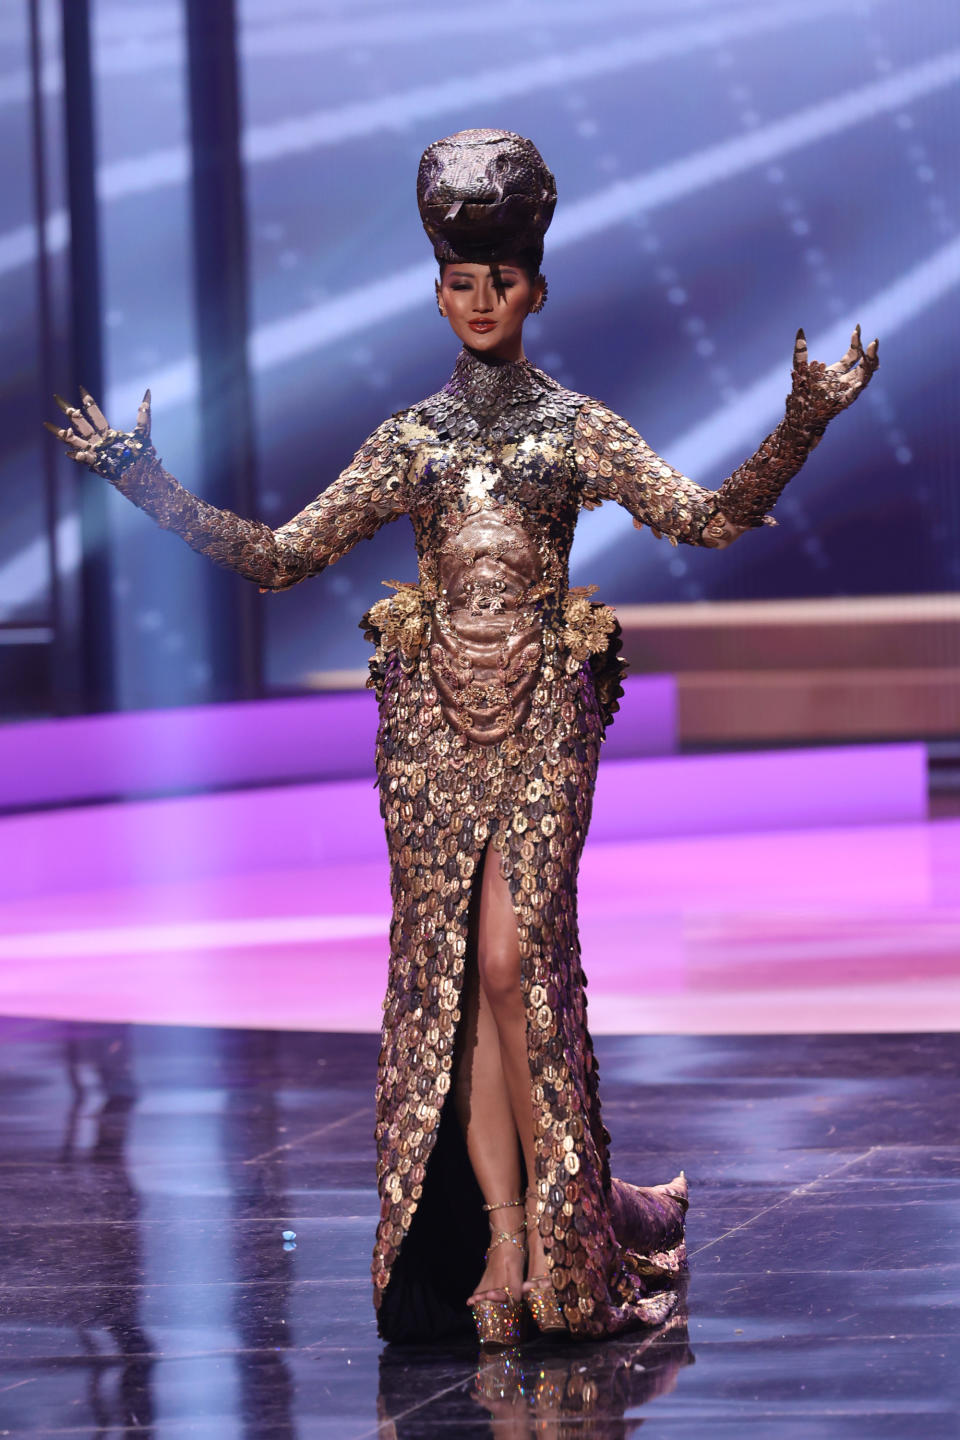 <p>Miss Indonesia Ayu Maulida Putri appears onstage at the Miss Universe 2021 - National Costume Show at Seminole Hard Rock Hotel & Casino on May 13, 2021 in Hollywood, Florida. (Photo by Rodrigo Varela/Getty Images)</p> 